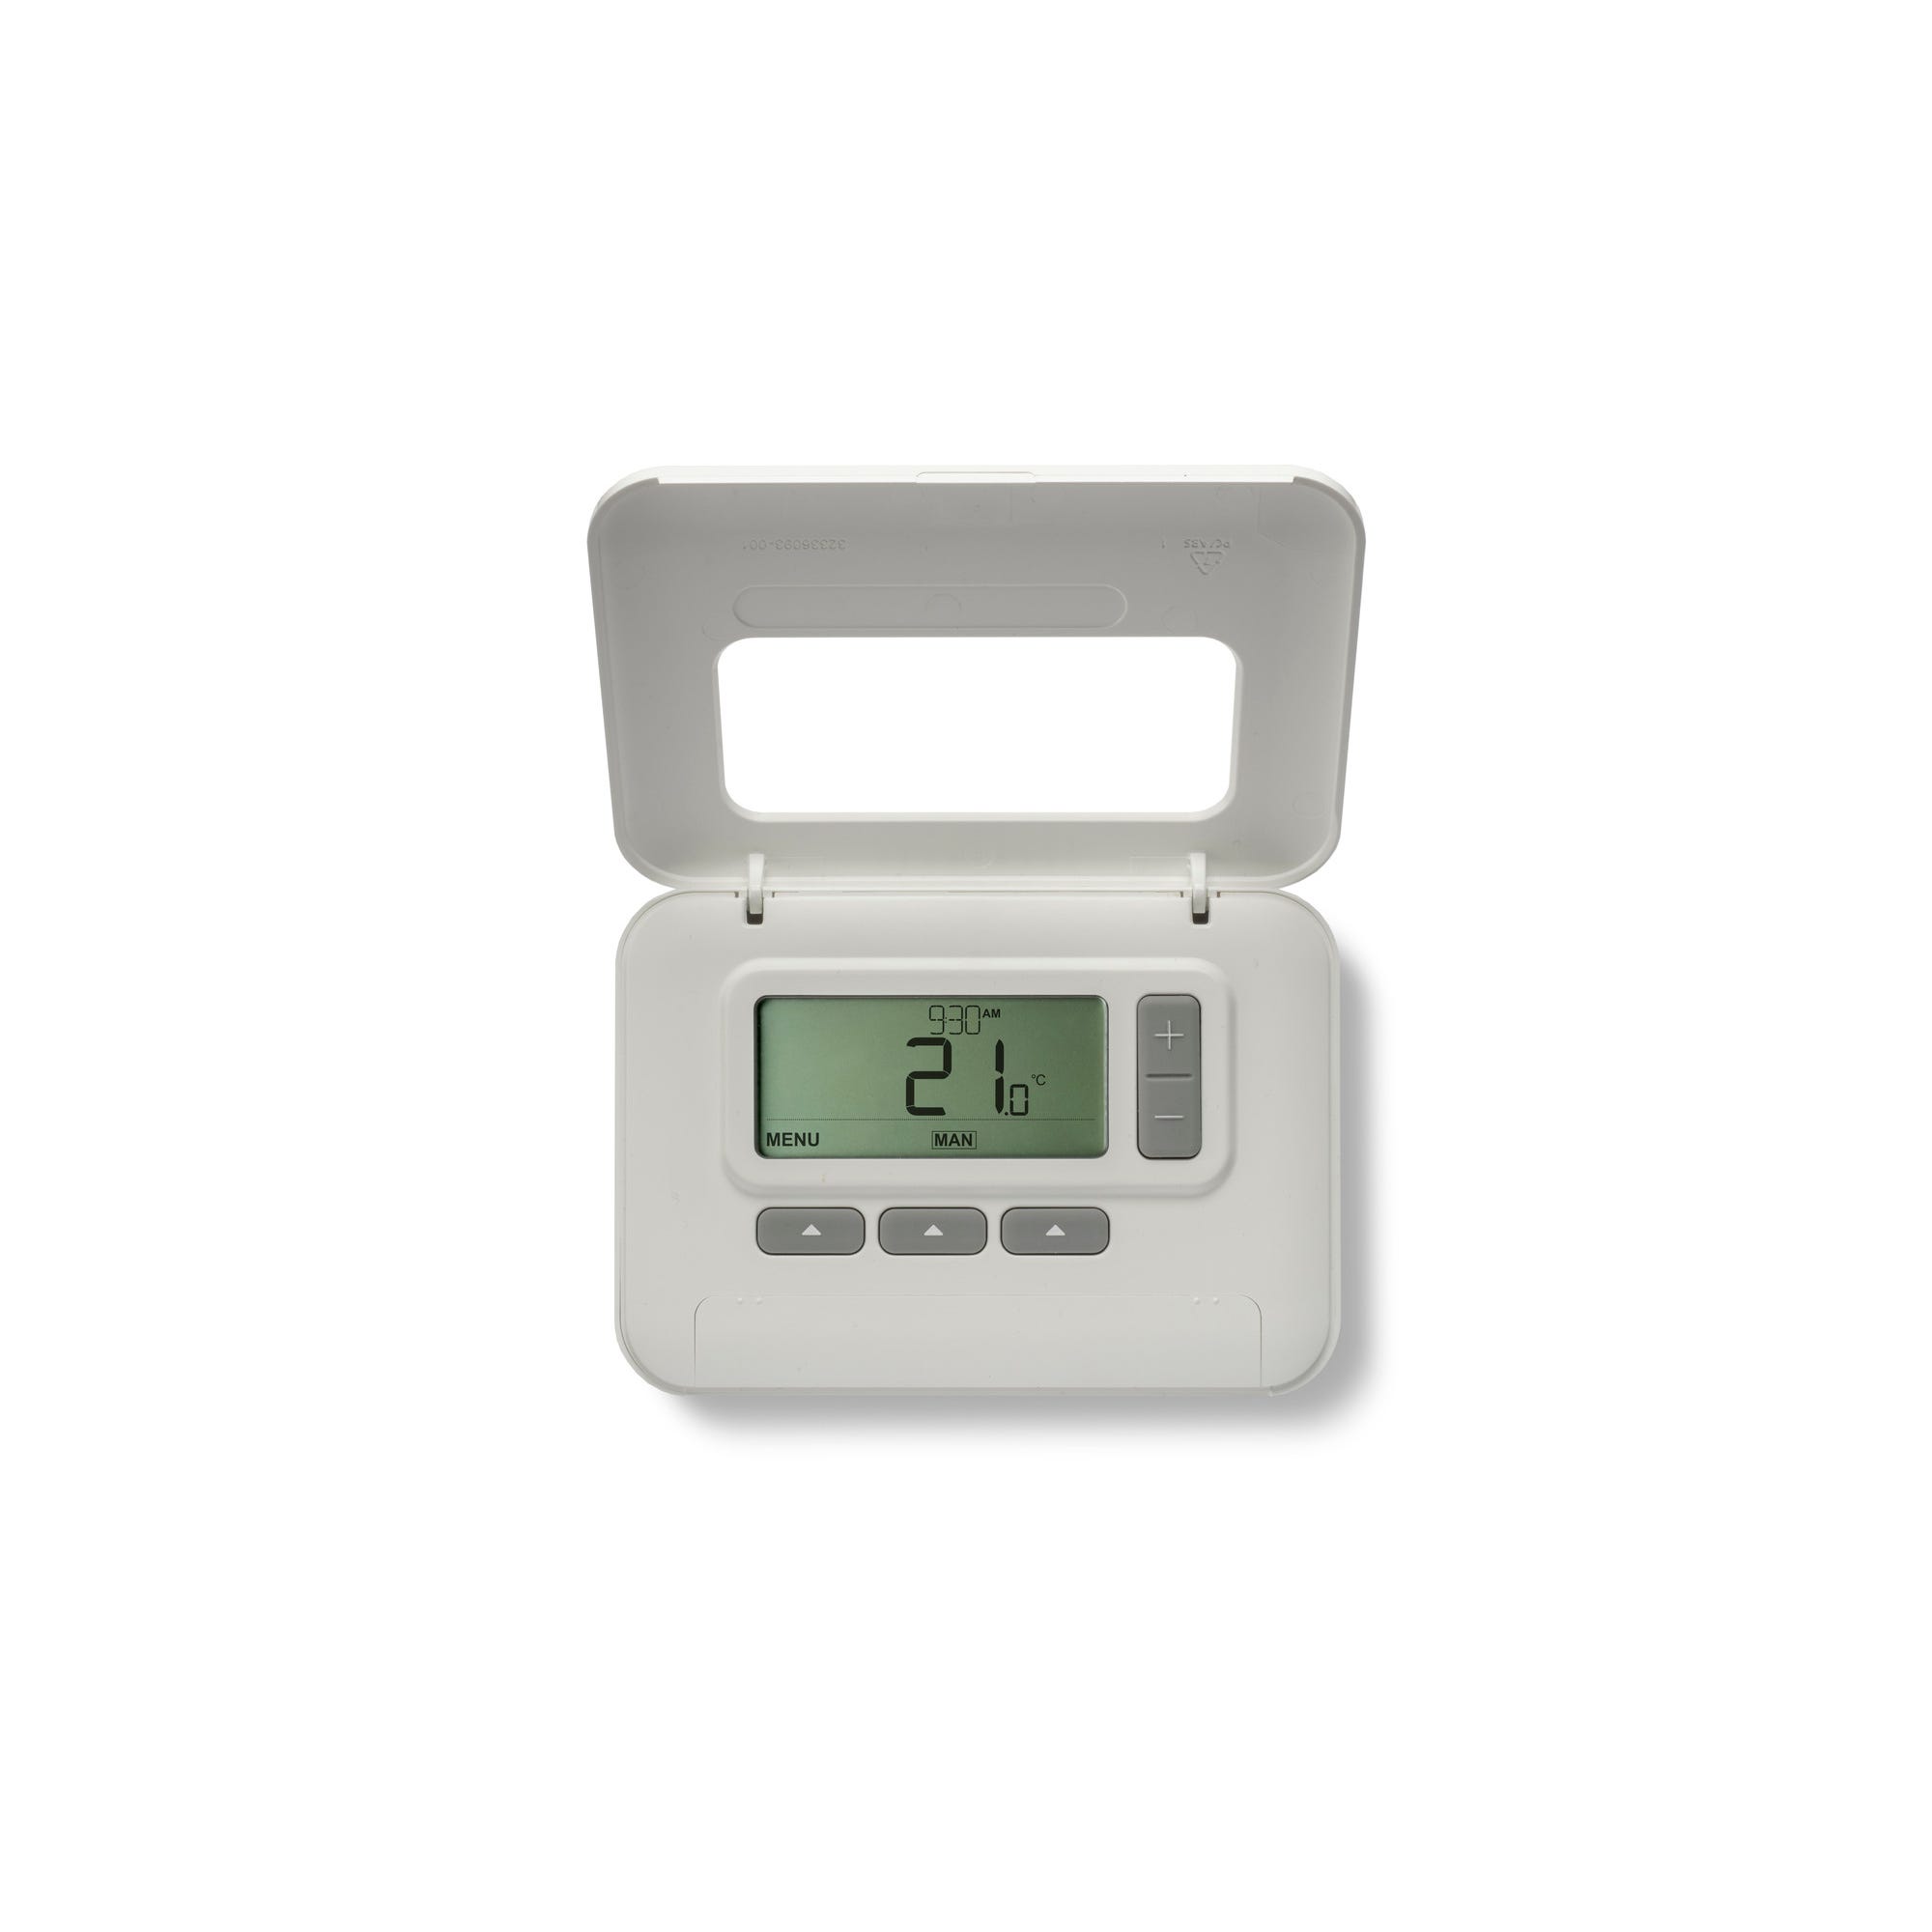 Thermostat programmable filaire T3 - HONEYWELL 1